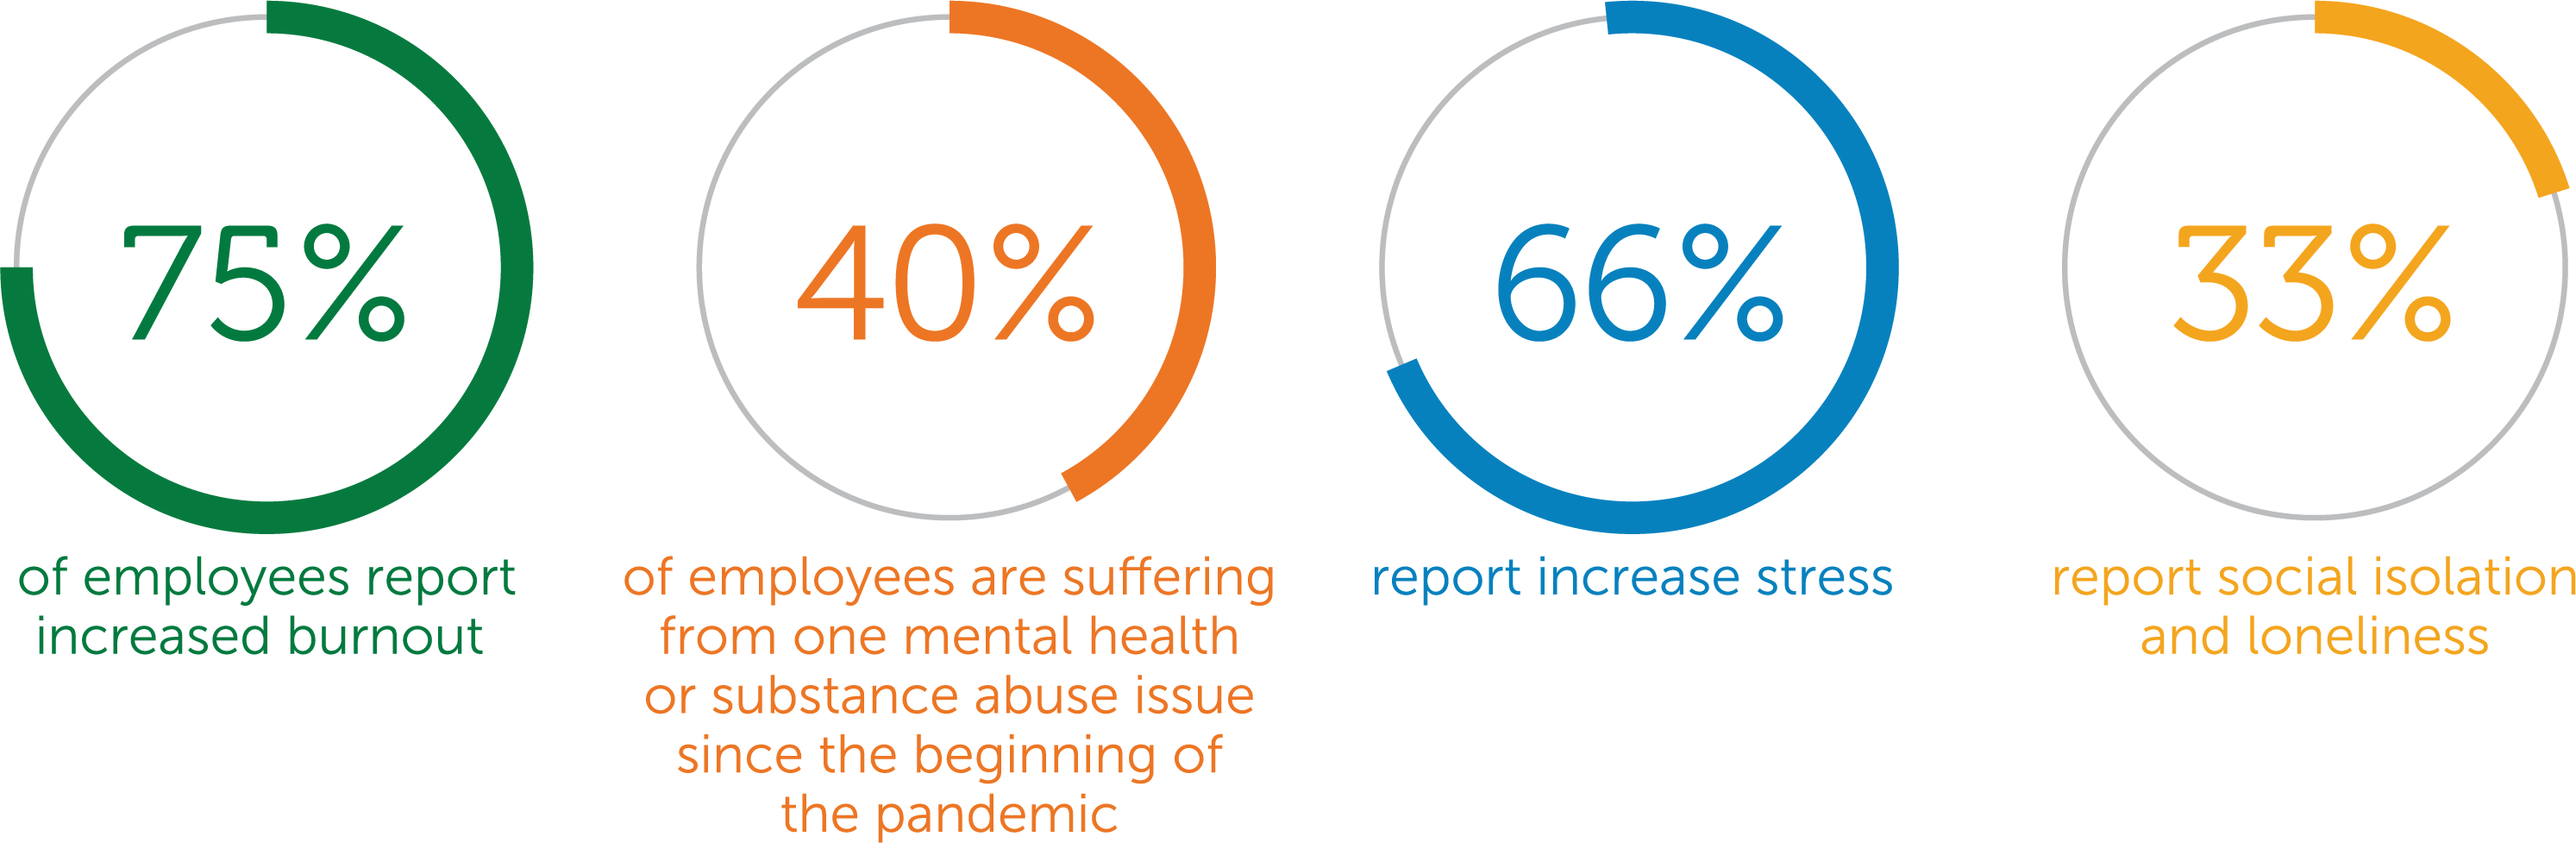 Graphic showing worker mental health statistics: 75% of employees report increased burnout 40% of employees are suffering from one mental health or substance abuse issue since the beginning of the pandemic 66% report increased stress 33% report social isolation and loneliness